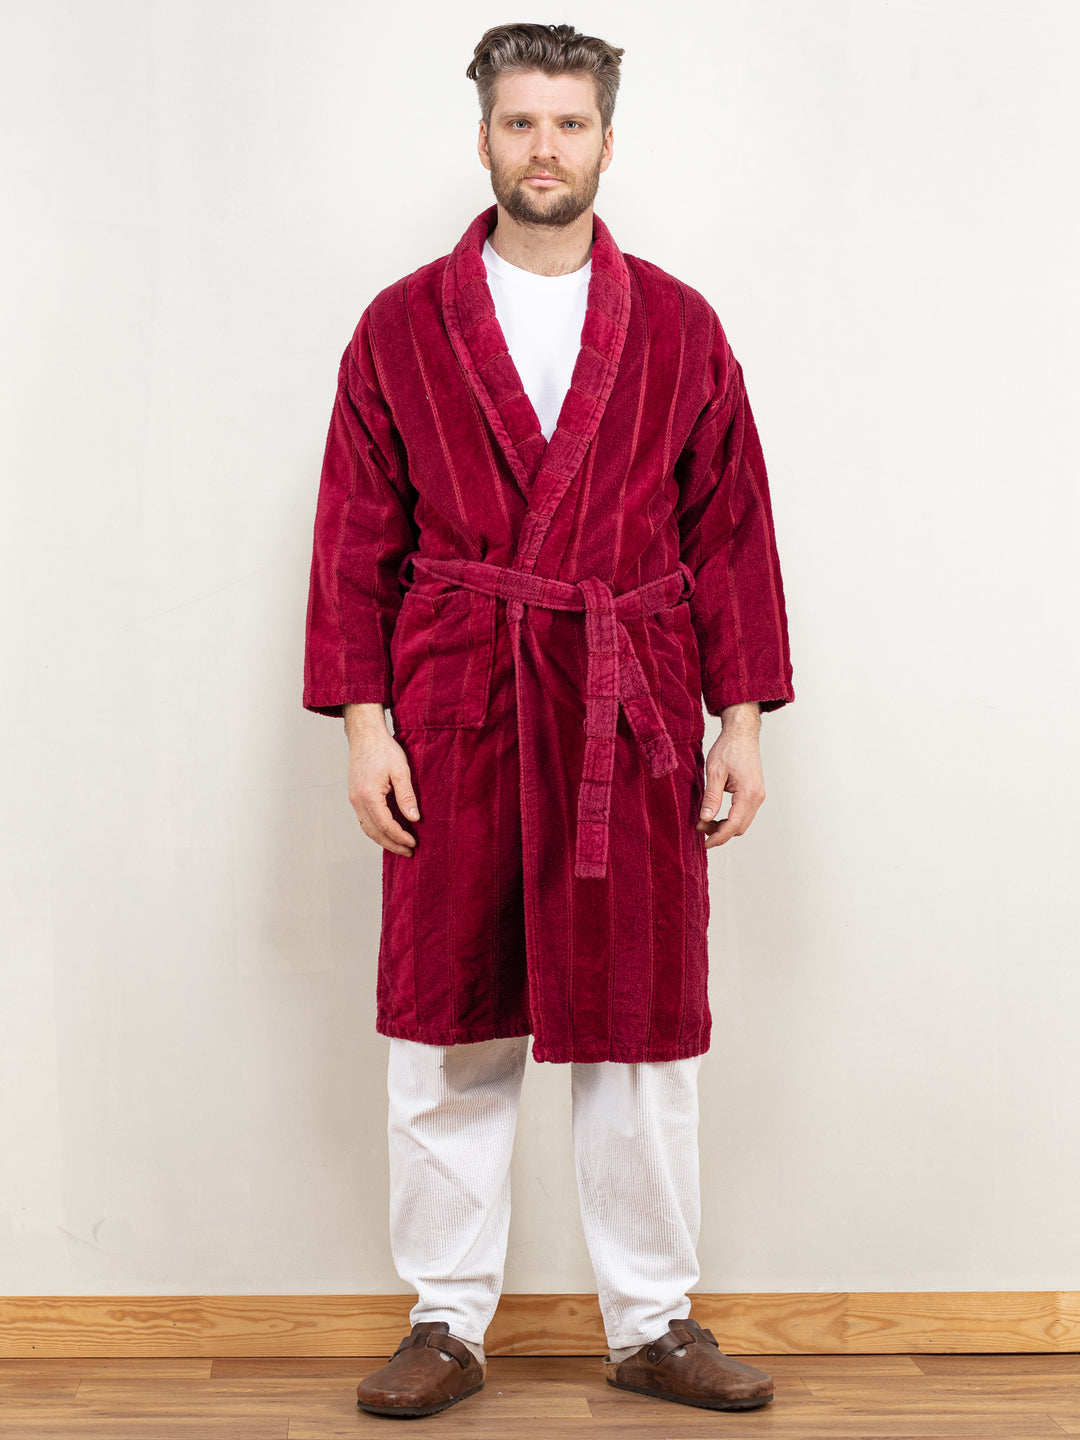 Men Dressing Gown vintage 90's morning robe bathrobe red terry cotton wrap belted hugh hefner gift for him birthday christmas size large